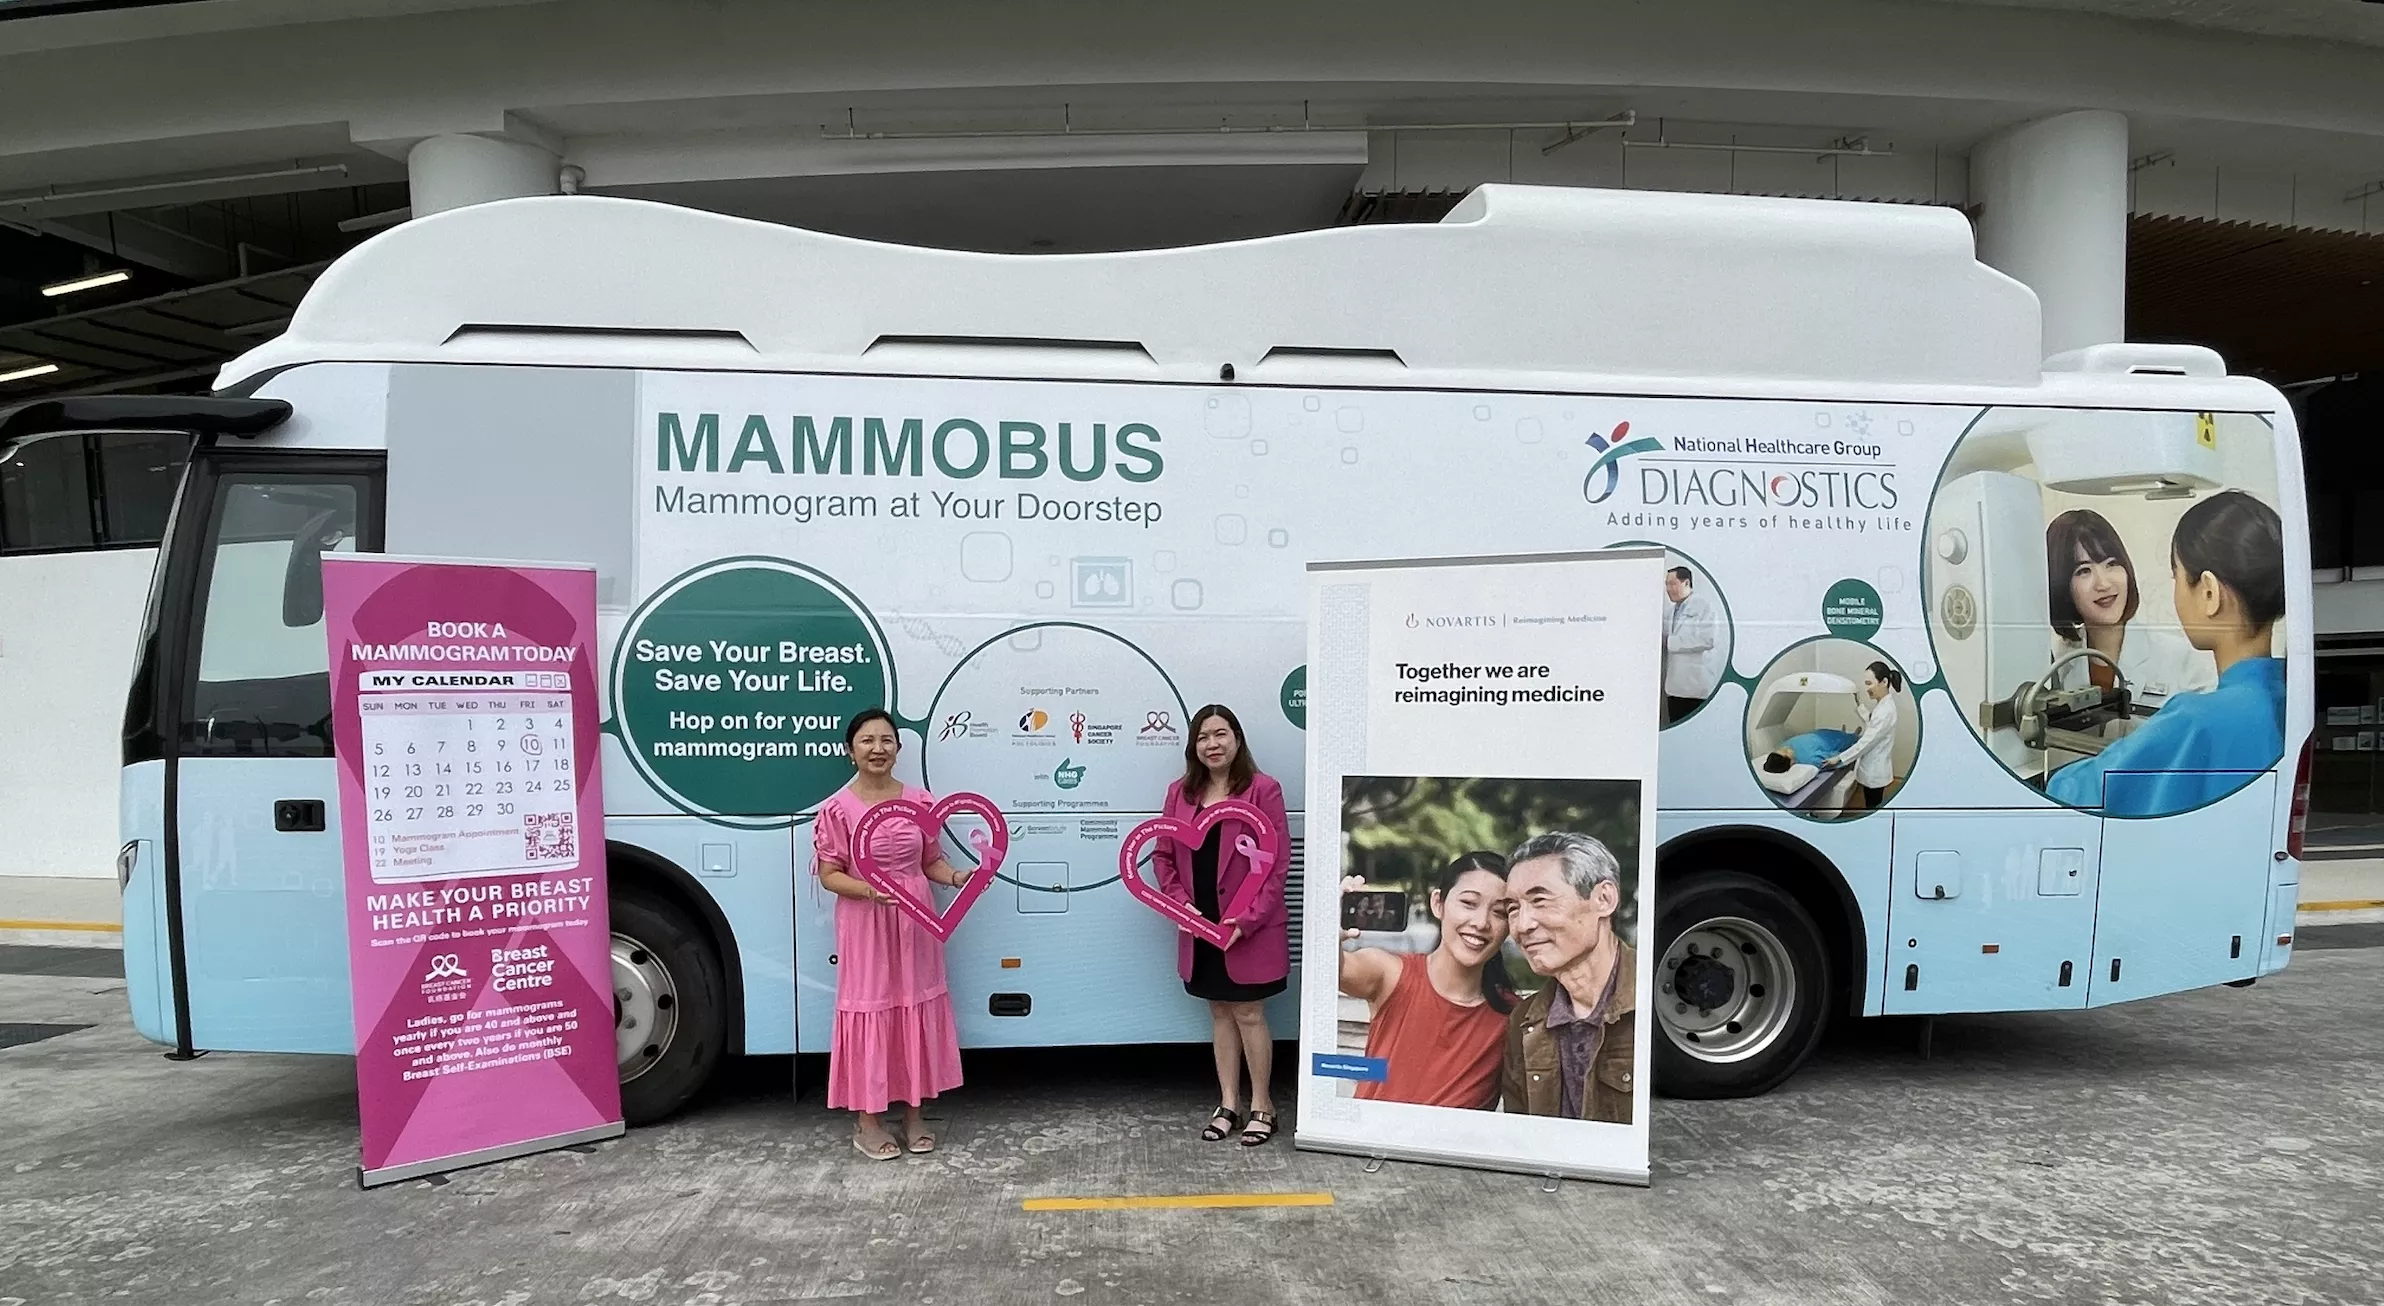 Novartis Singapore (Novartis) is partnering Breast Cancer Foundation (BCF) to support its community outreach and Community Mammobus Programme